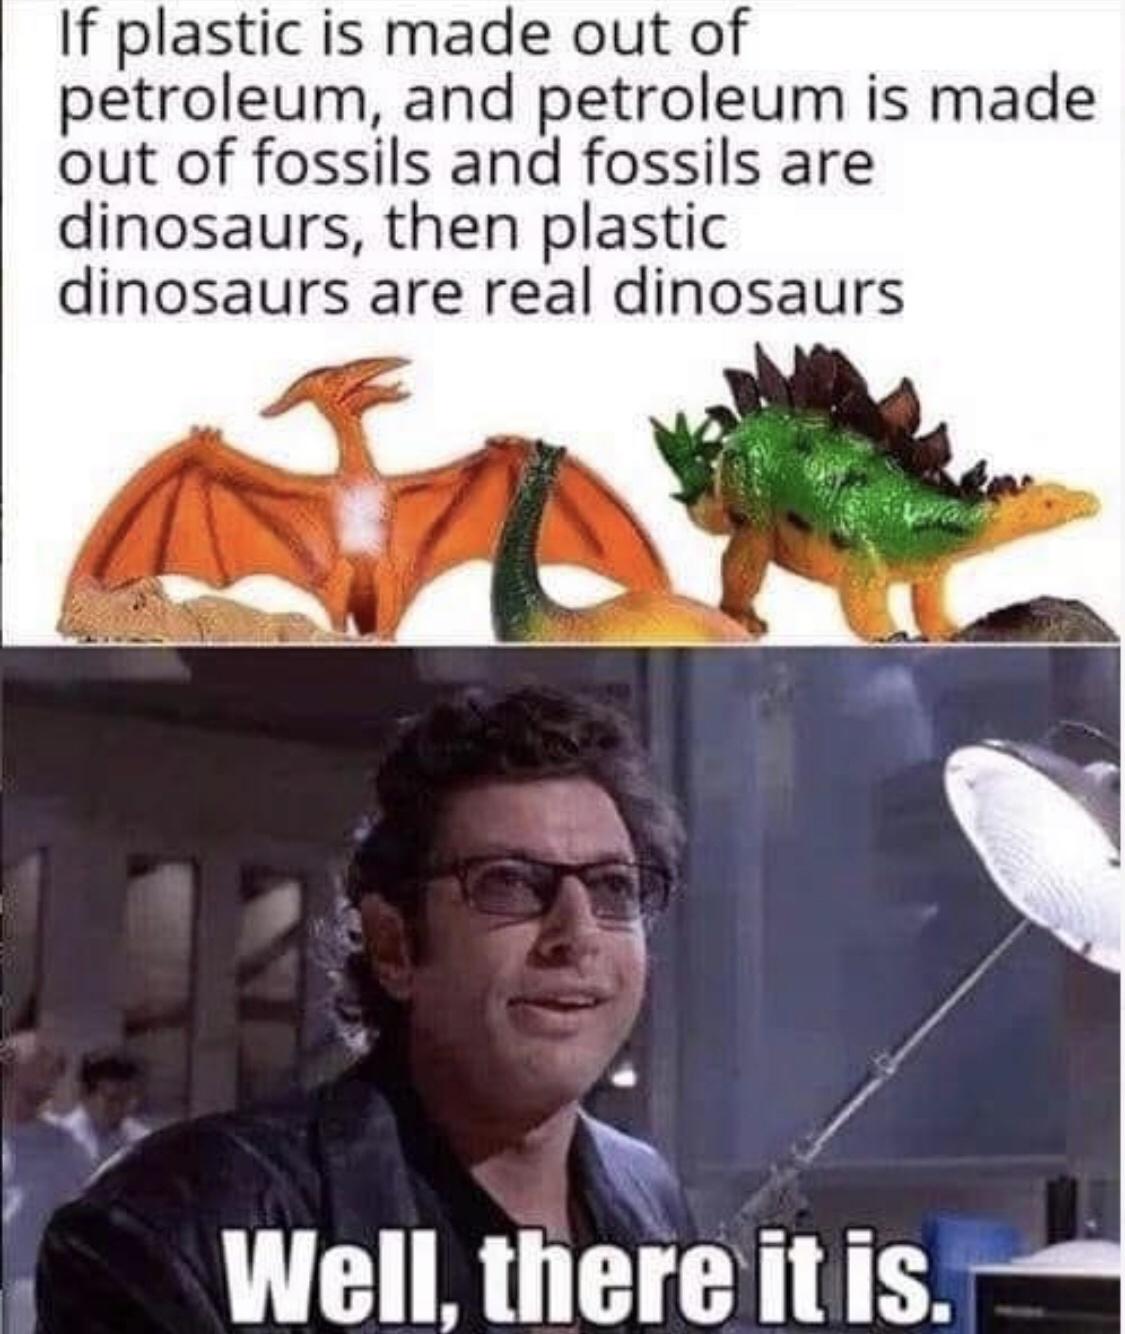 plastic dinosaurs meme - If plastic is made out of petroleum, and petroleum is made out of fossils and fossils are dinosaurs, then plastic dinosaurs are real dinosaurs Well, there it is.